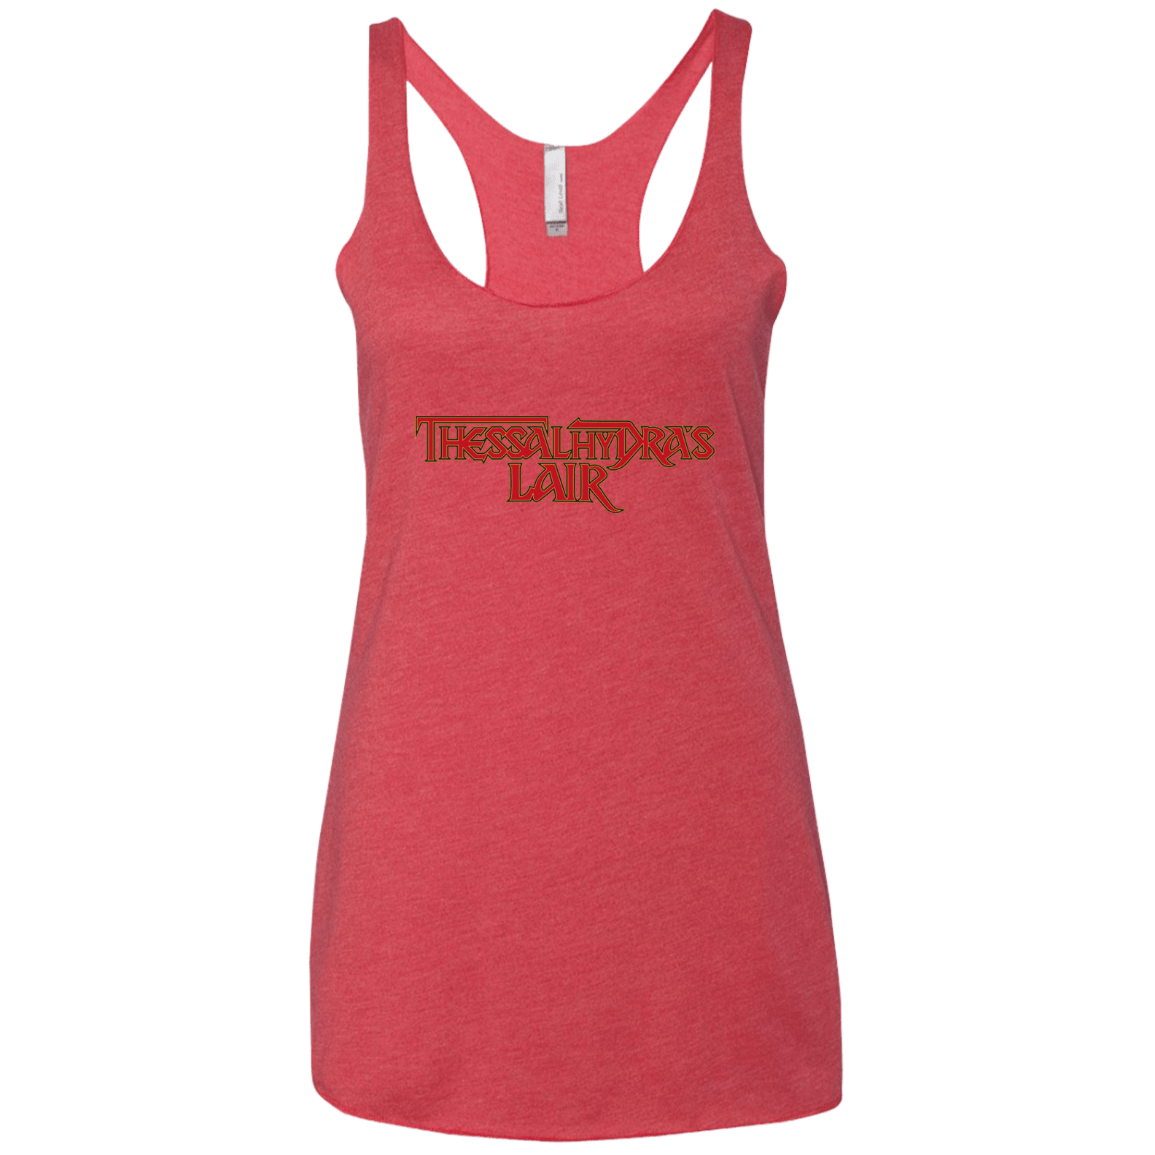 T-Shirts Vintage Red / X-Small Thessalhydras Lair Women's Triblend Racerback Tank